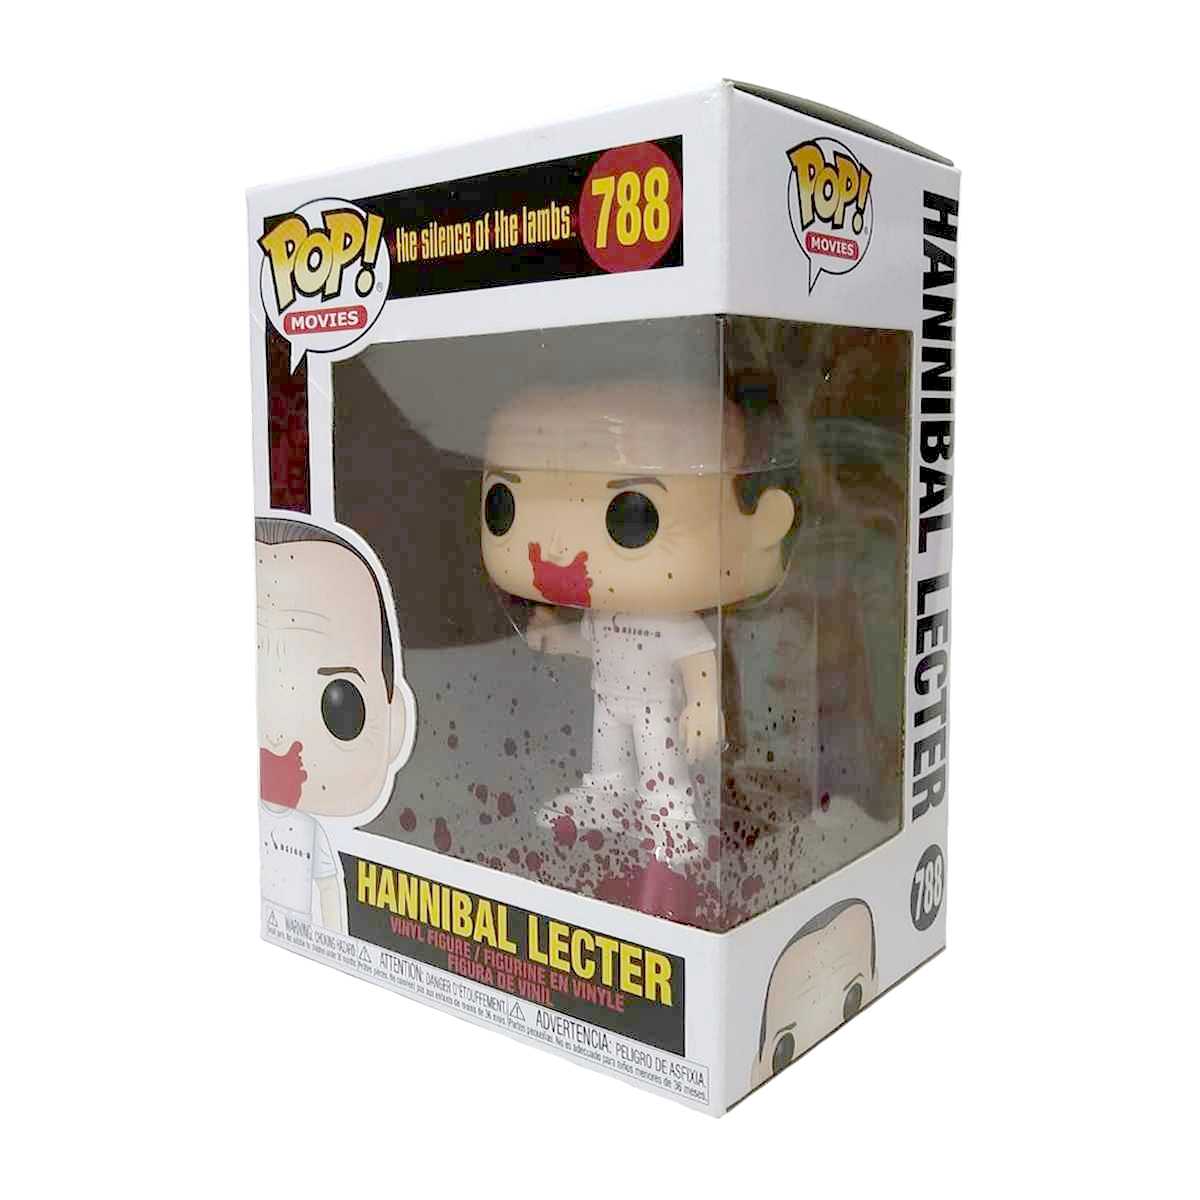 Funko Pop! Movies The Silence of the Lambs Hanniball Lecter vinyl figure número 788